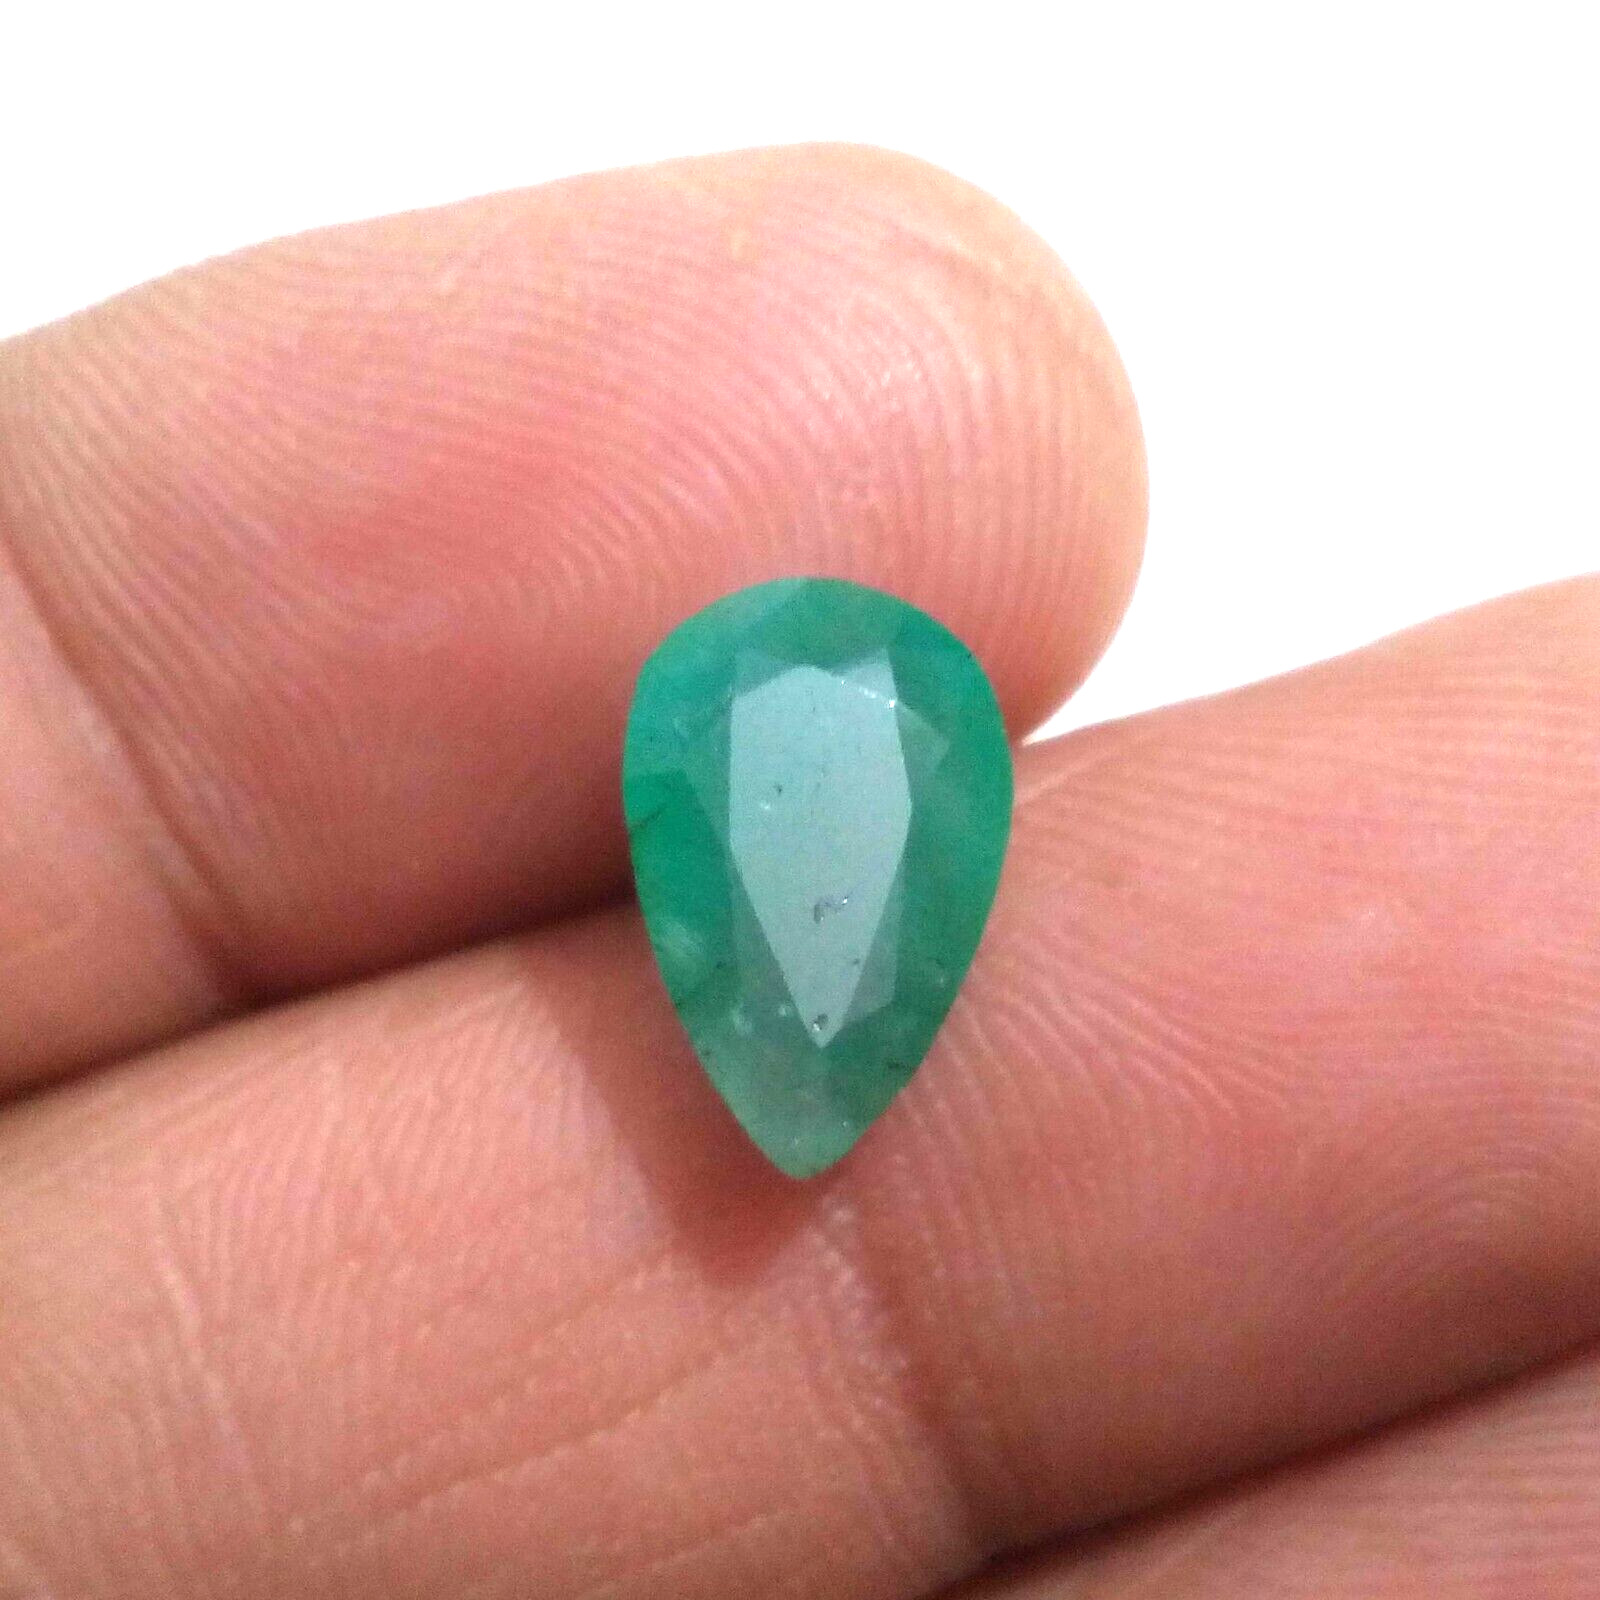 Outstanding Zambian Emerald Pear Shape 3 Crt Rare Green Faceted Loose Gemstone